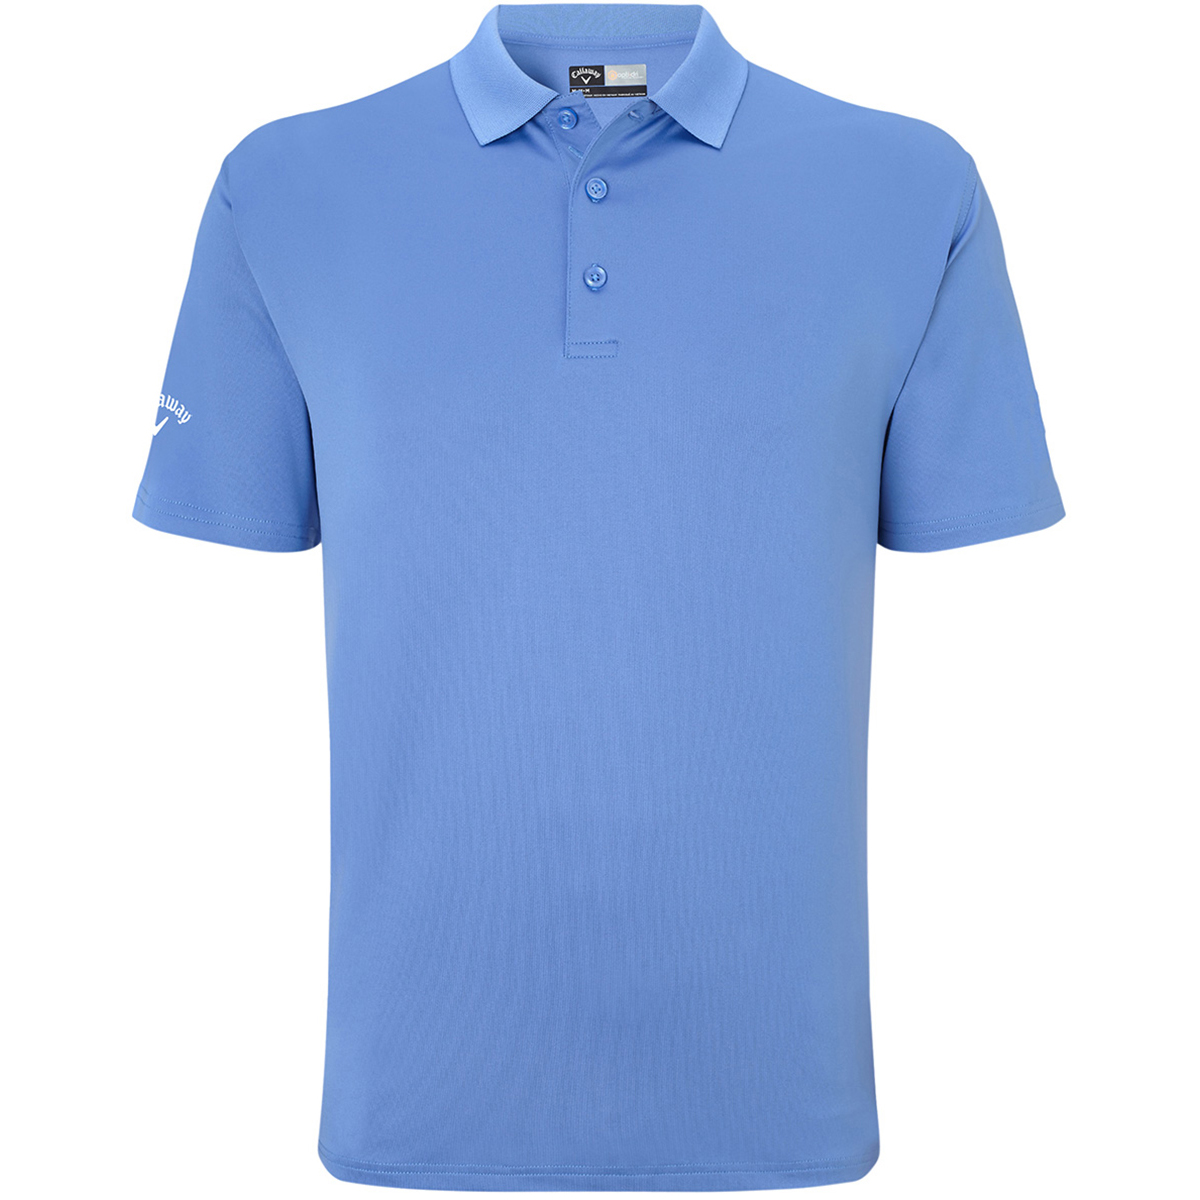 Callaway Golf Classic Chev Solid Polo Shirt from american golf